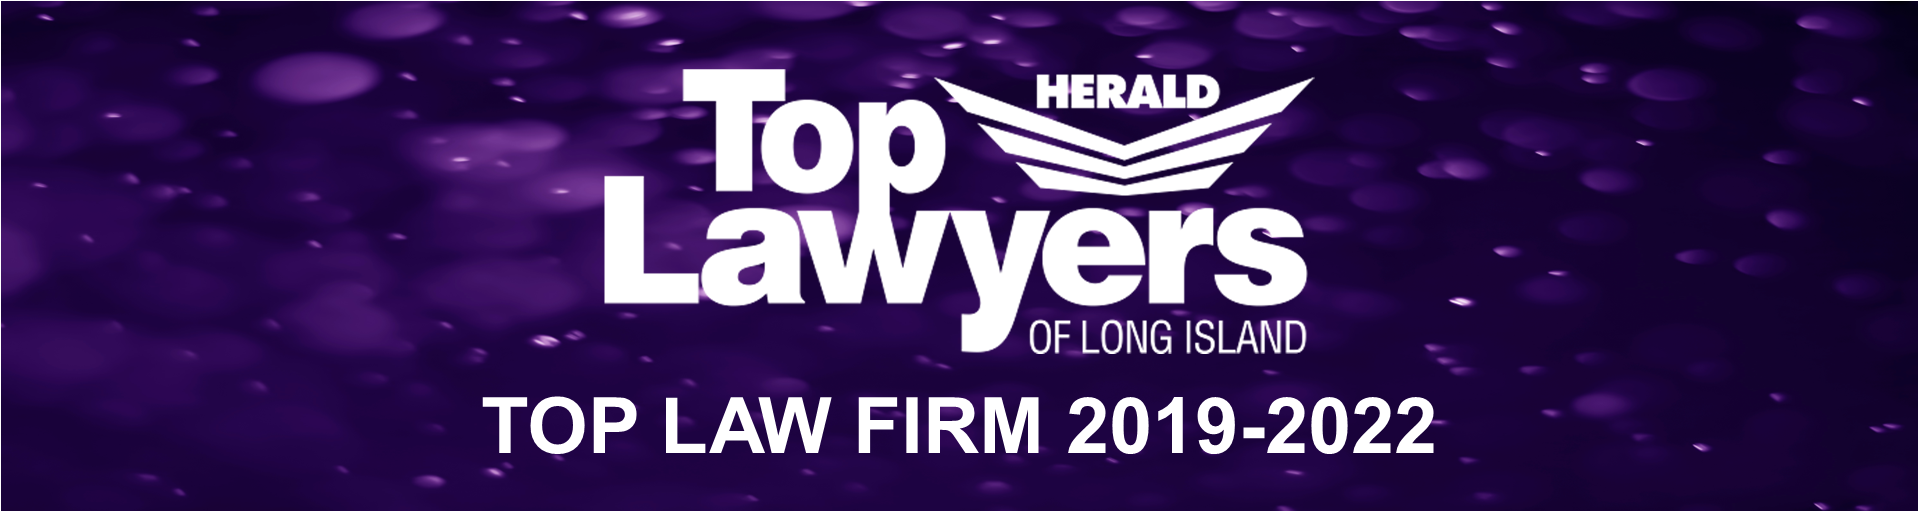 Top Lawyers Banner